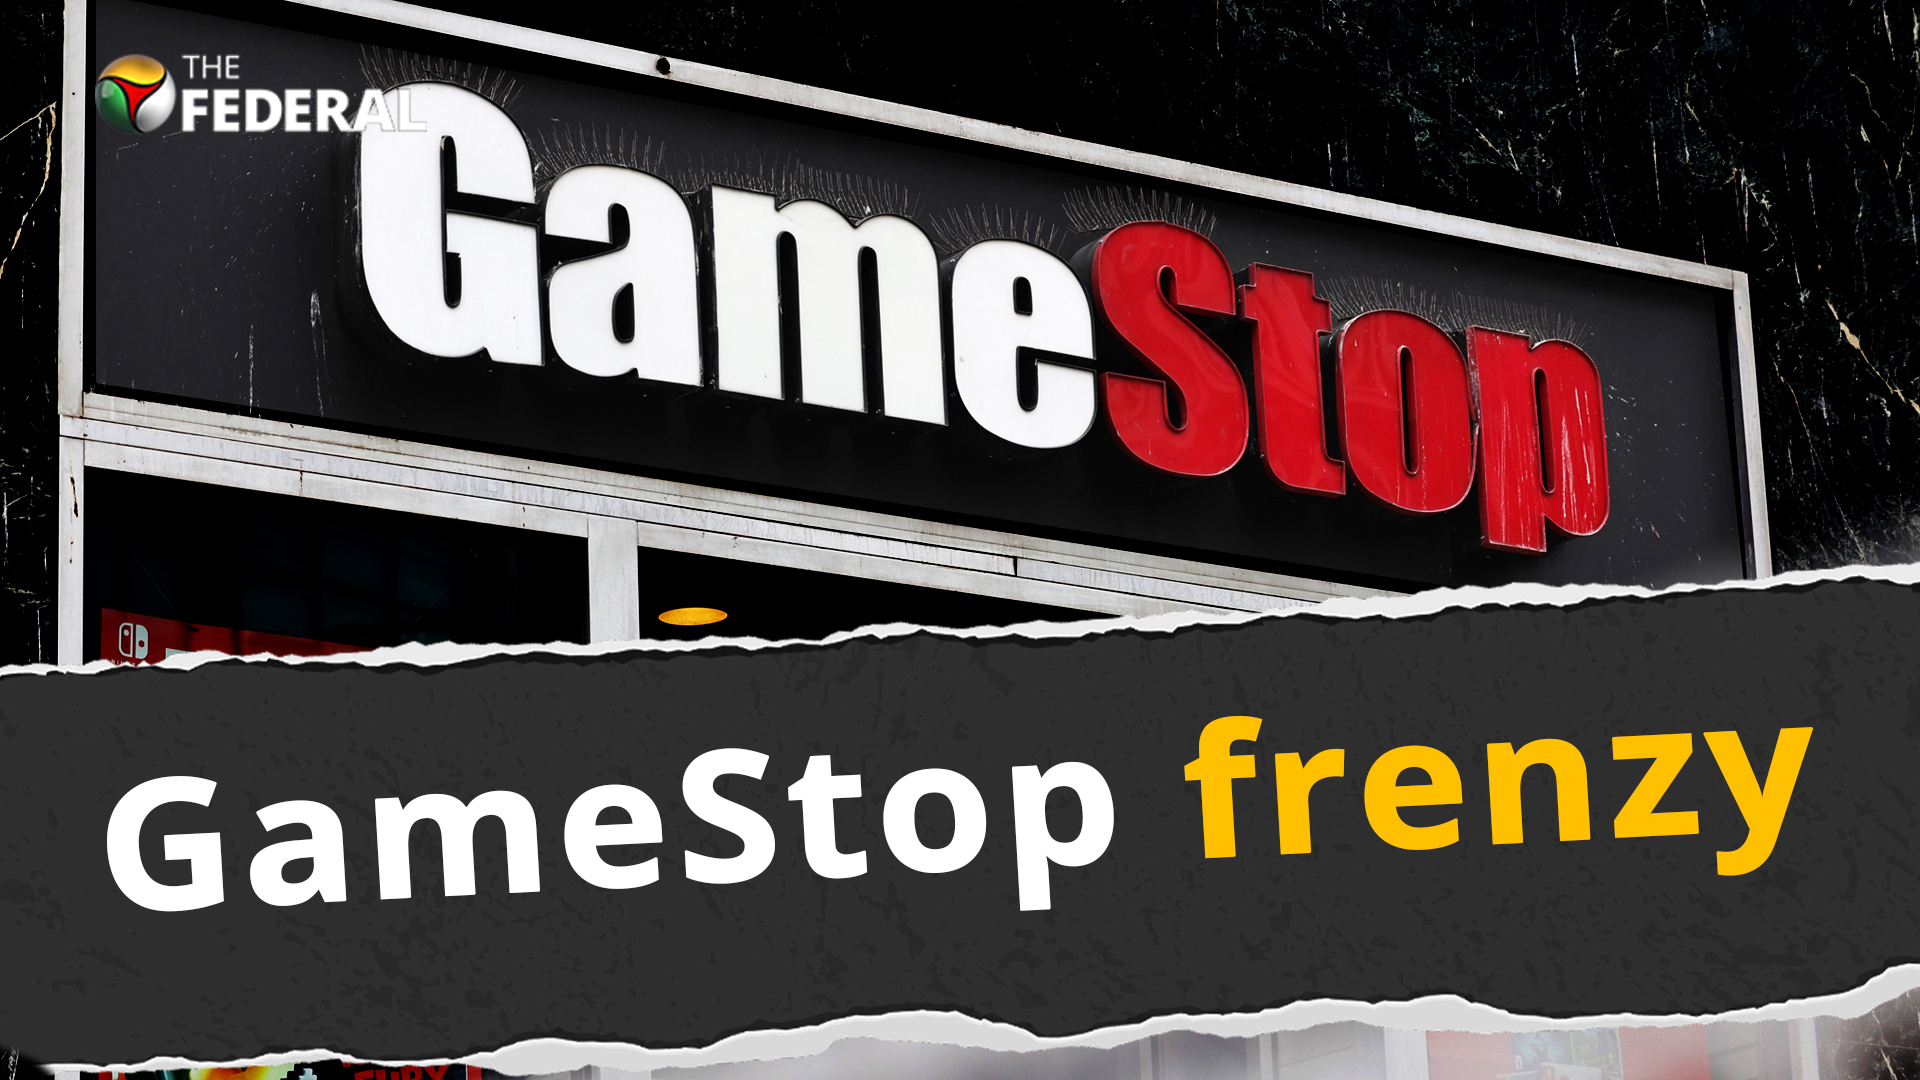 Explained: Whats going on with GameStop